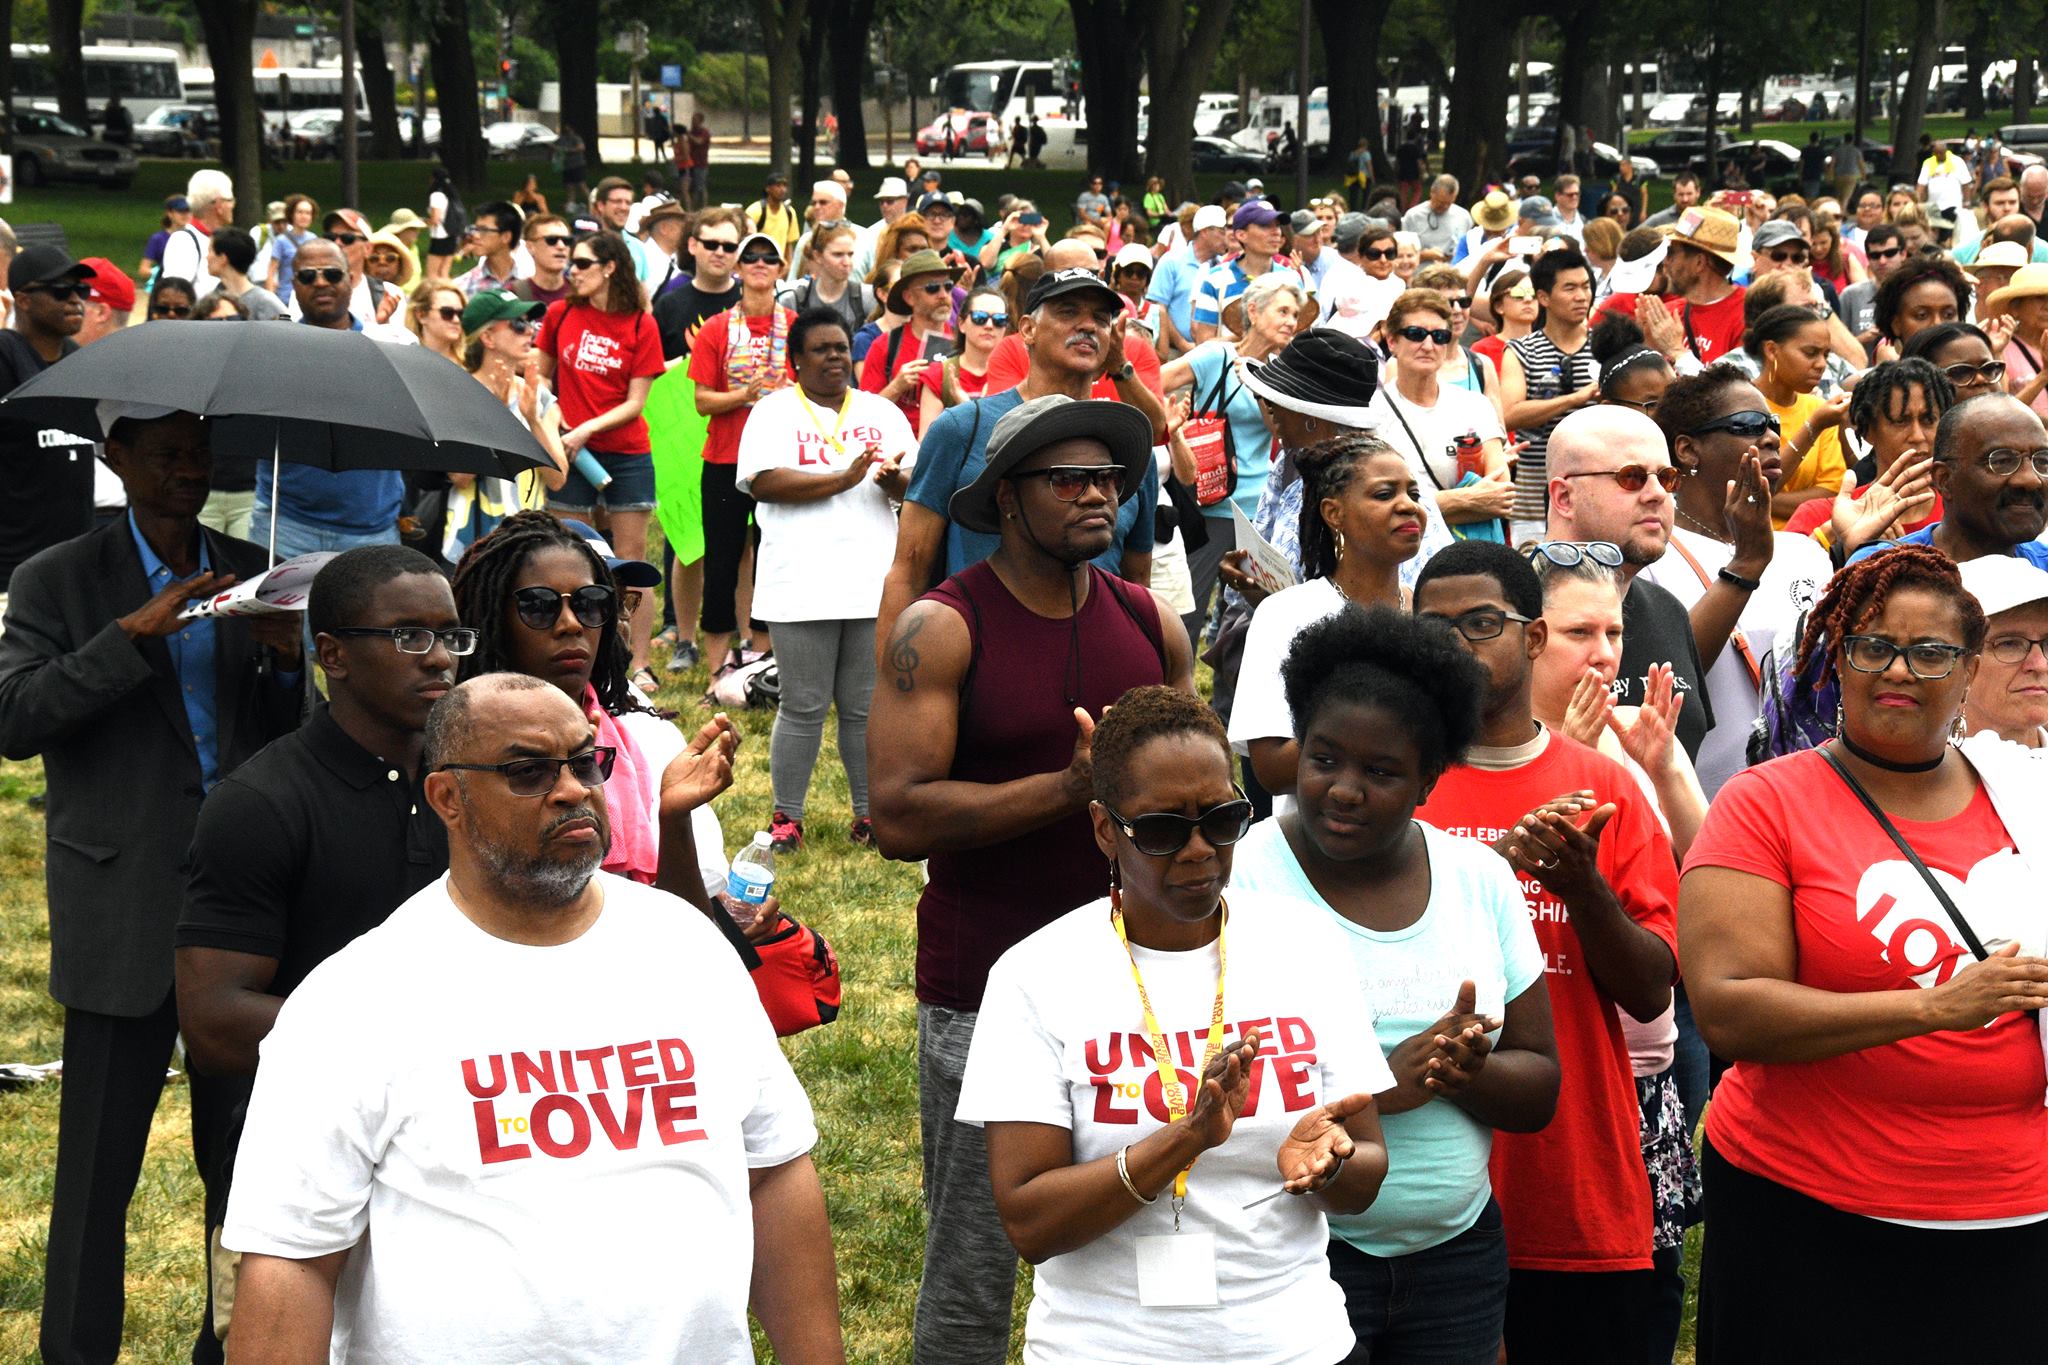 The crowd at the United to Love Rally